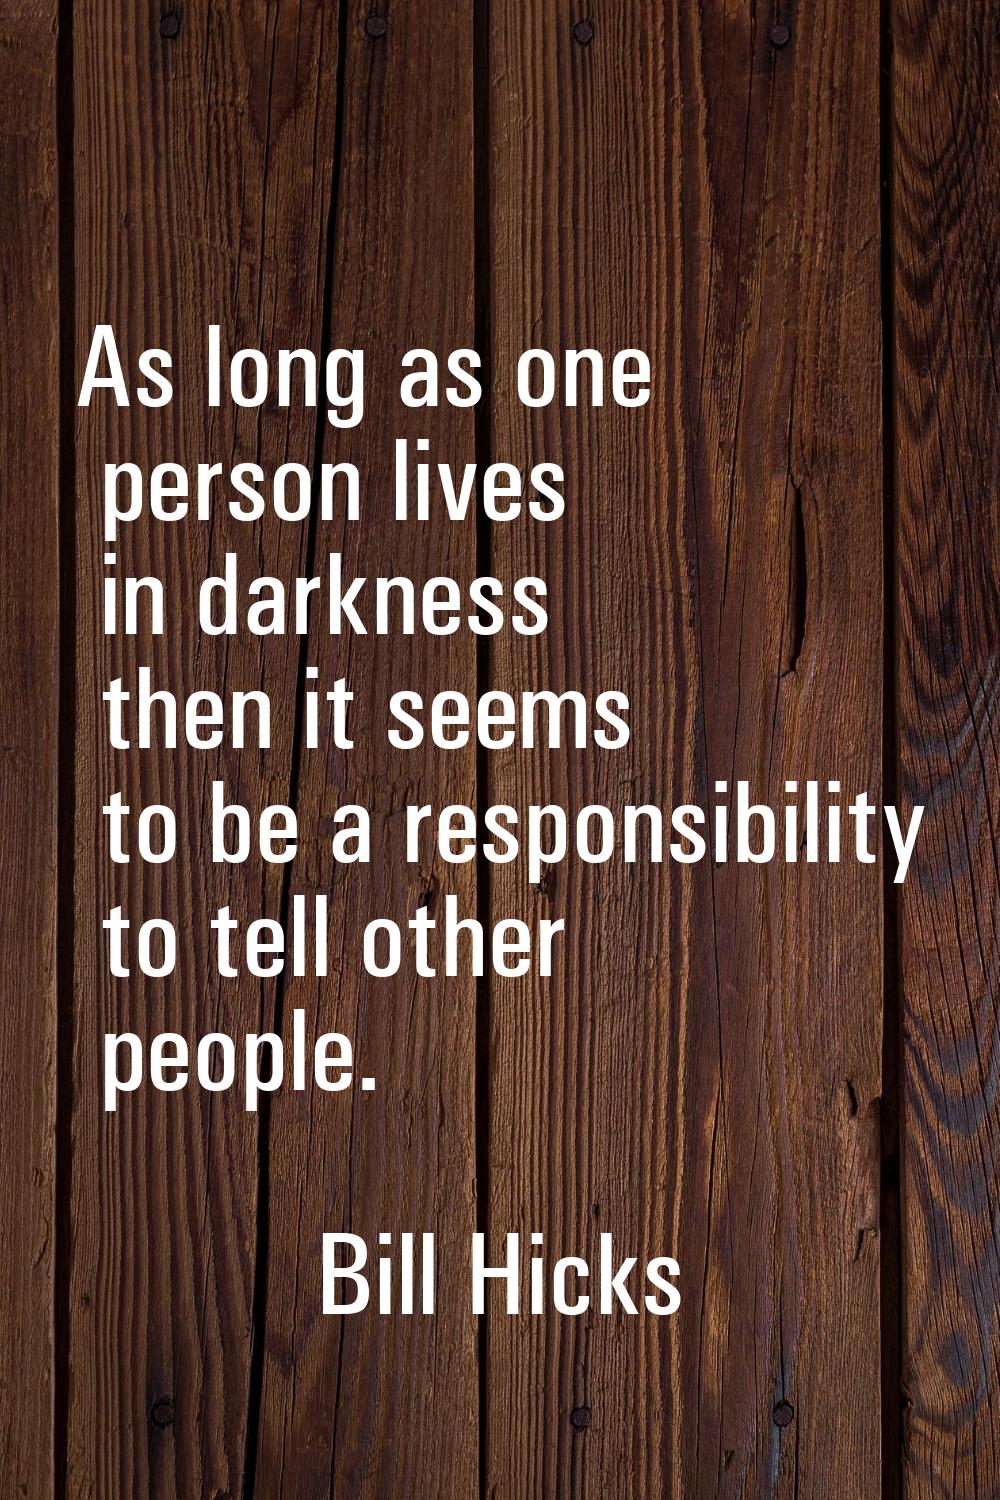 As long as one person lives in darkness then it seems to be a responsibility to tell other people.